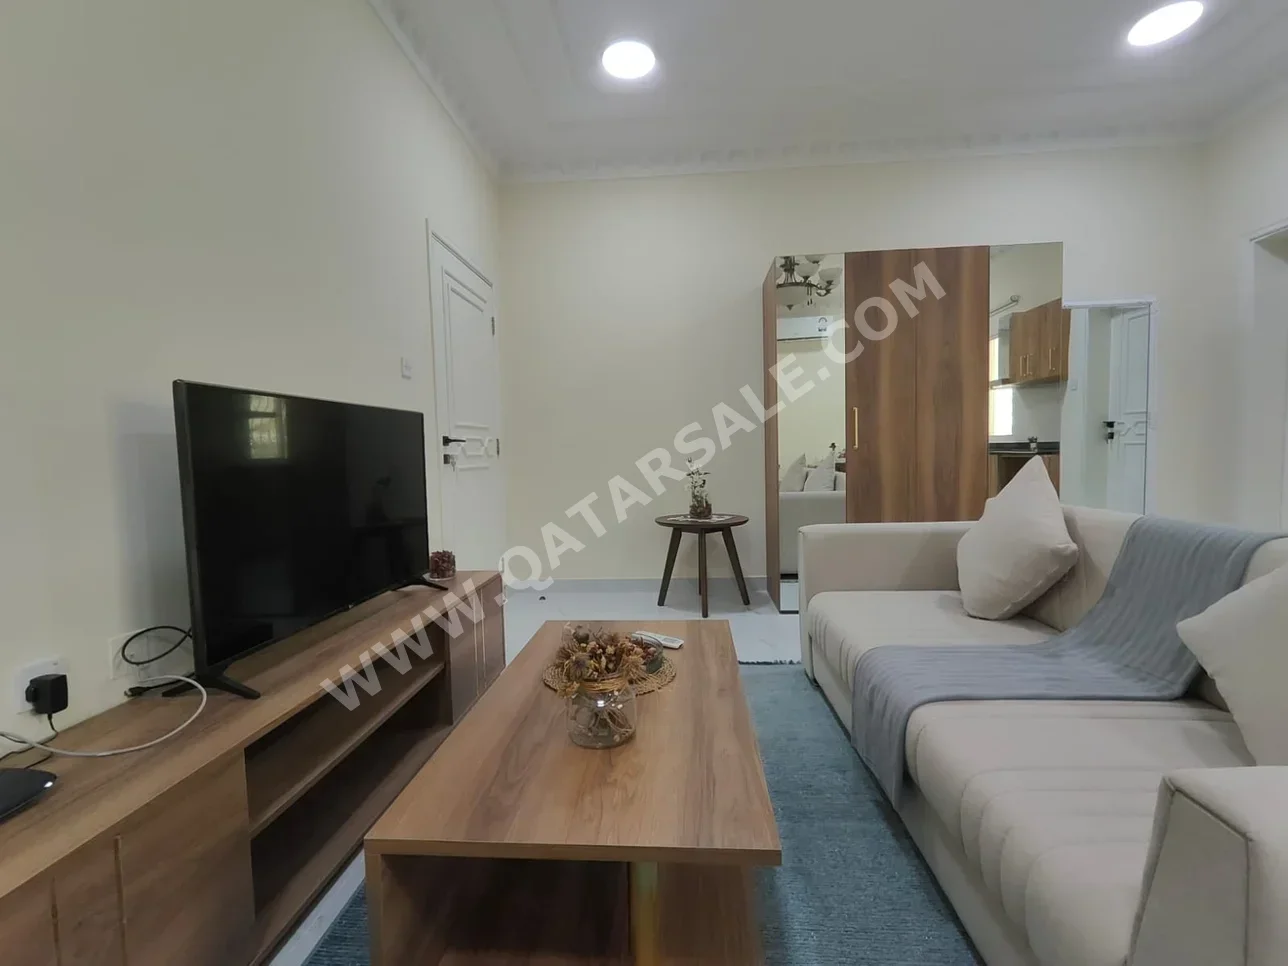 Studio  For Rent  in Doha -  Al Duhail  Fully Furnished